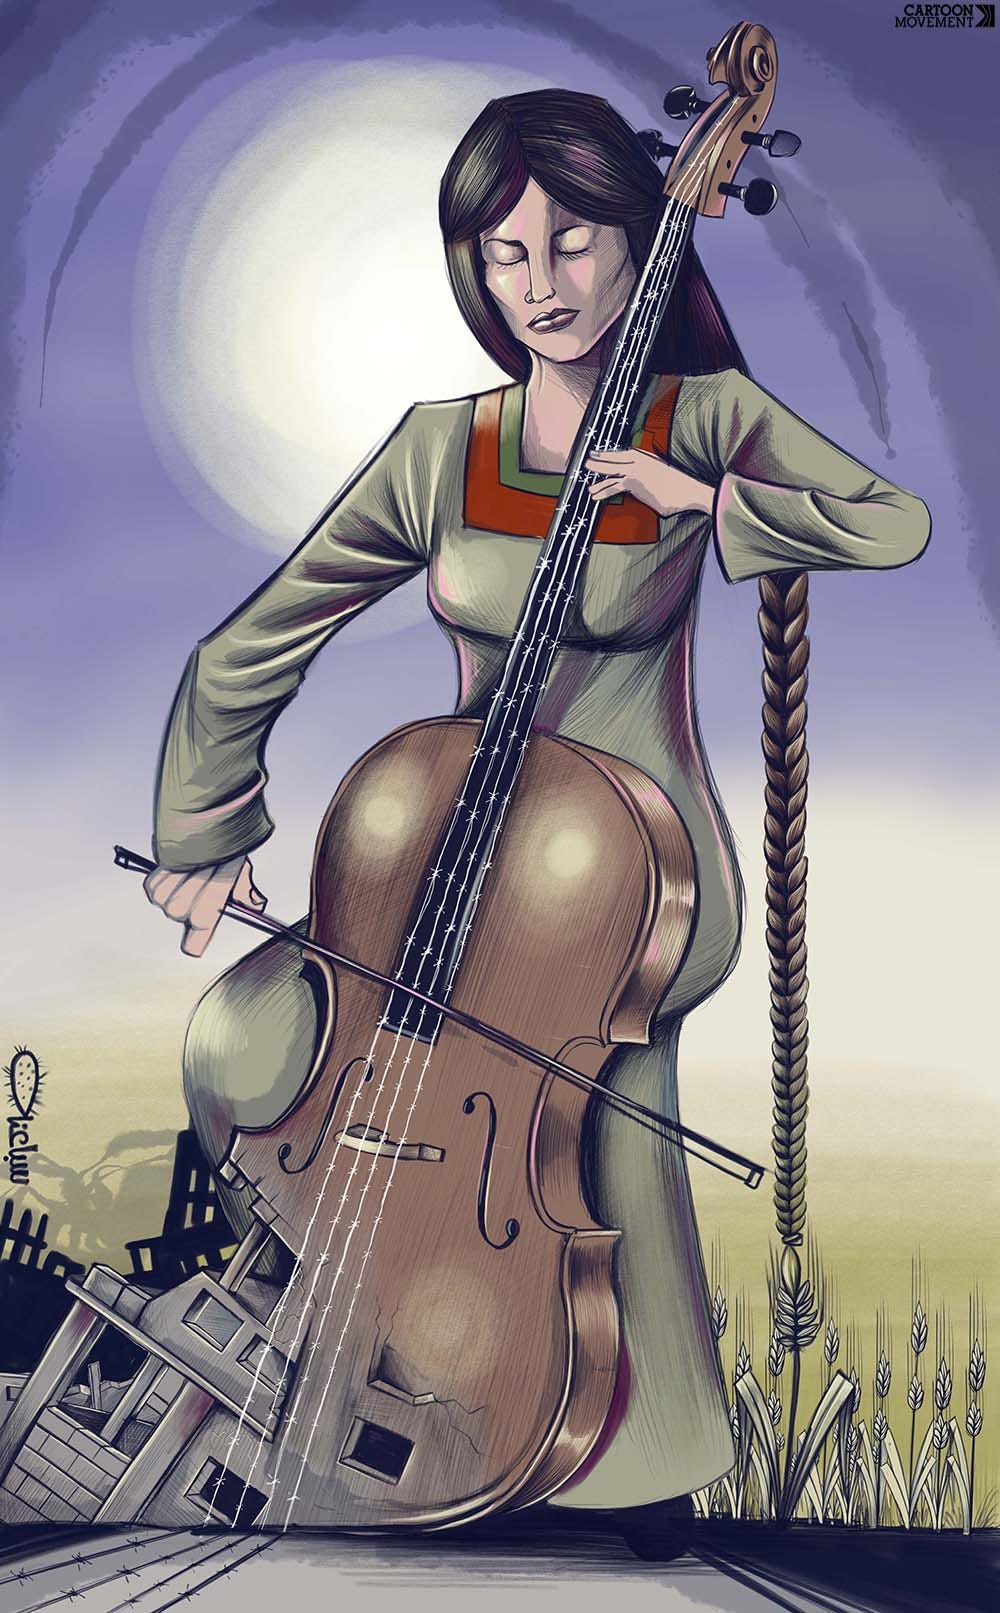 Cartoon showing Gaza in ruins; the ruins slowly transform into woman playing a cello by moonlight.